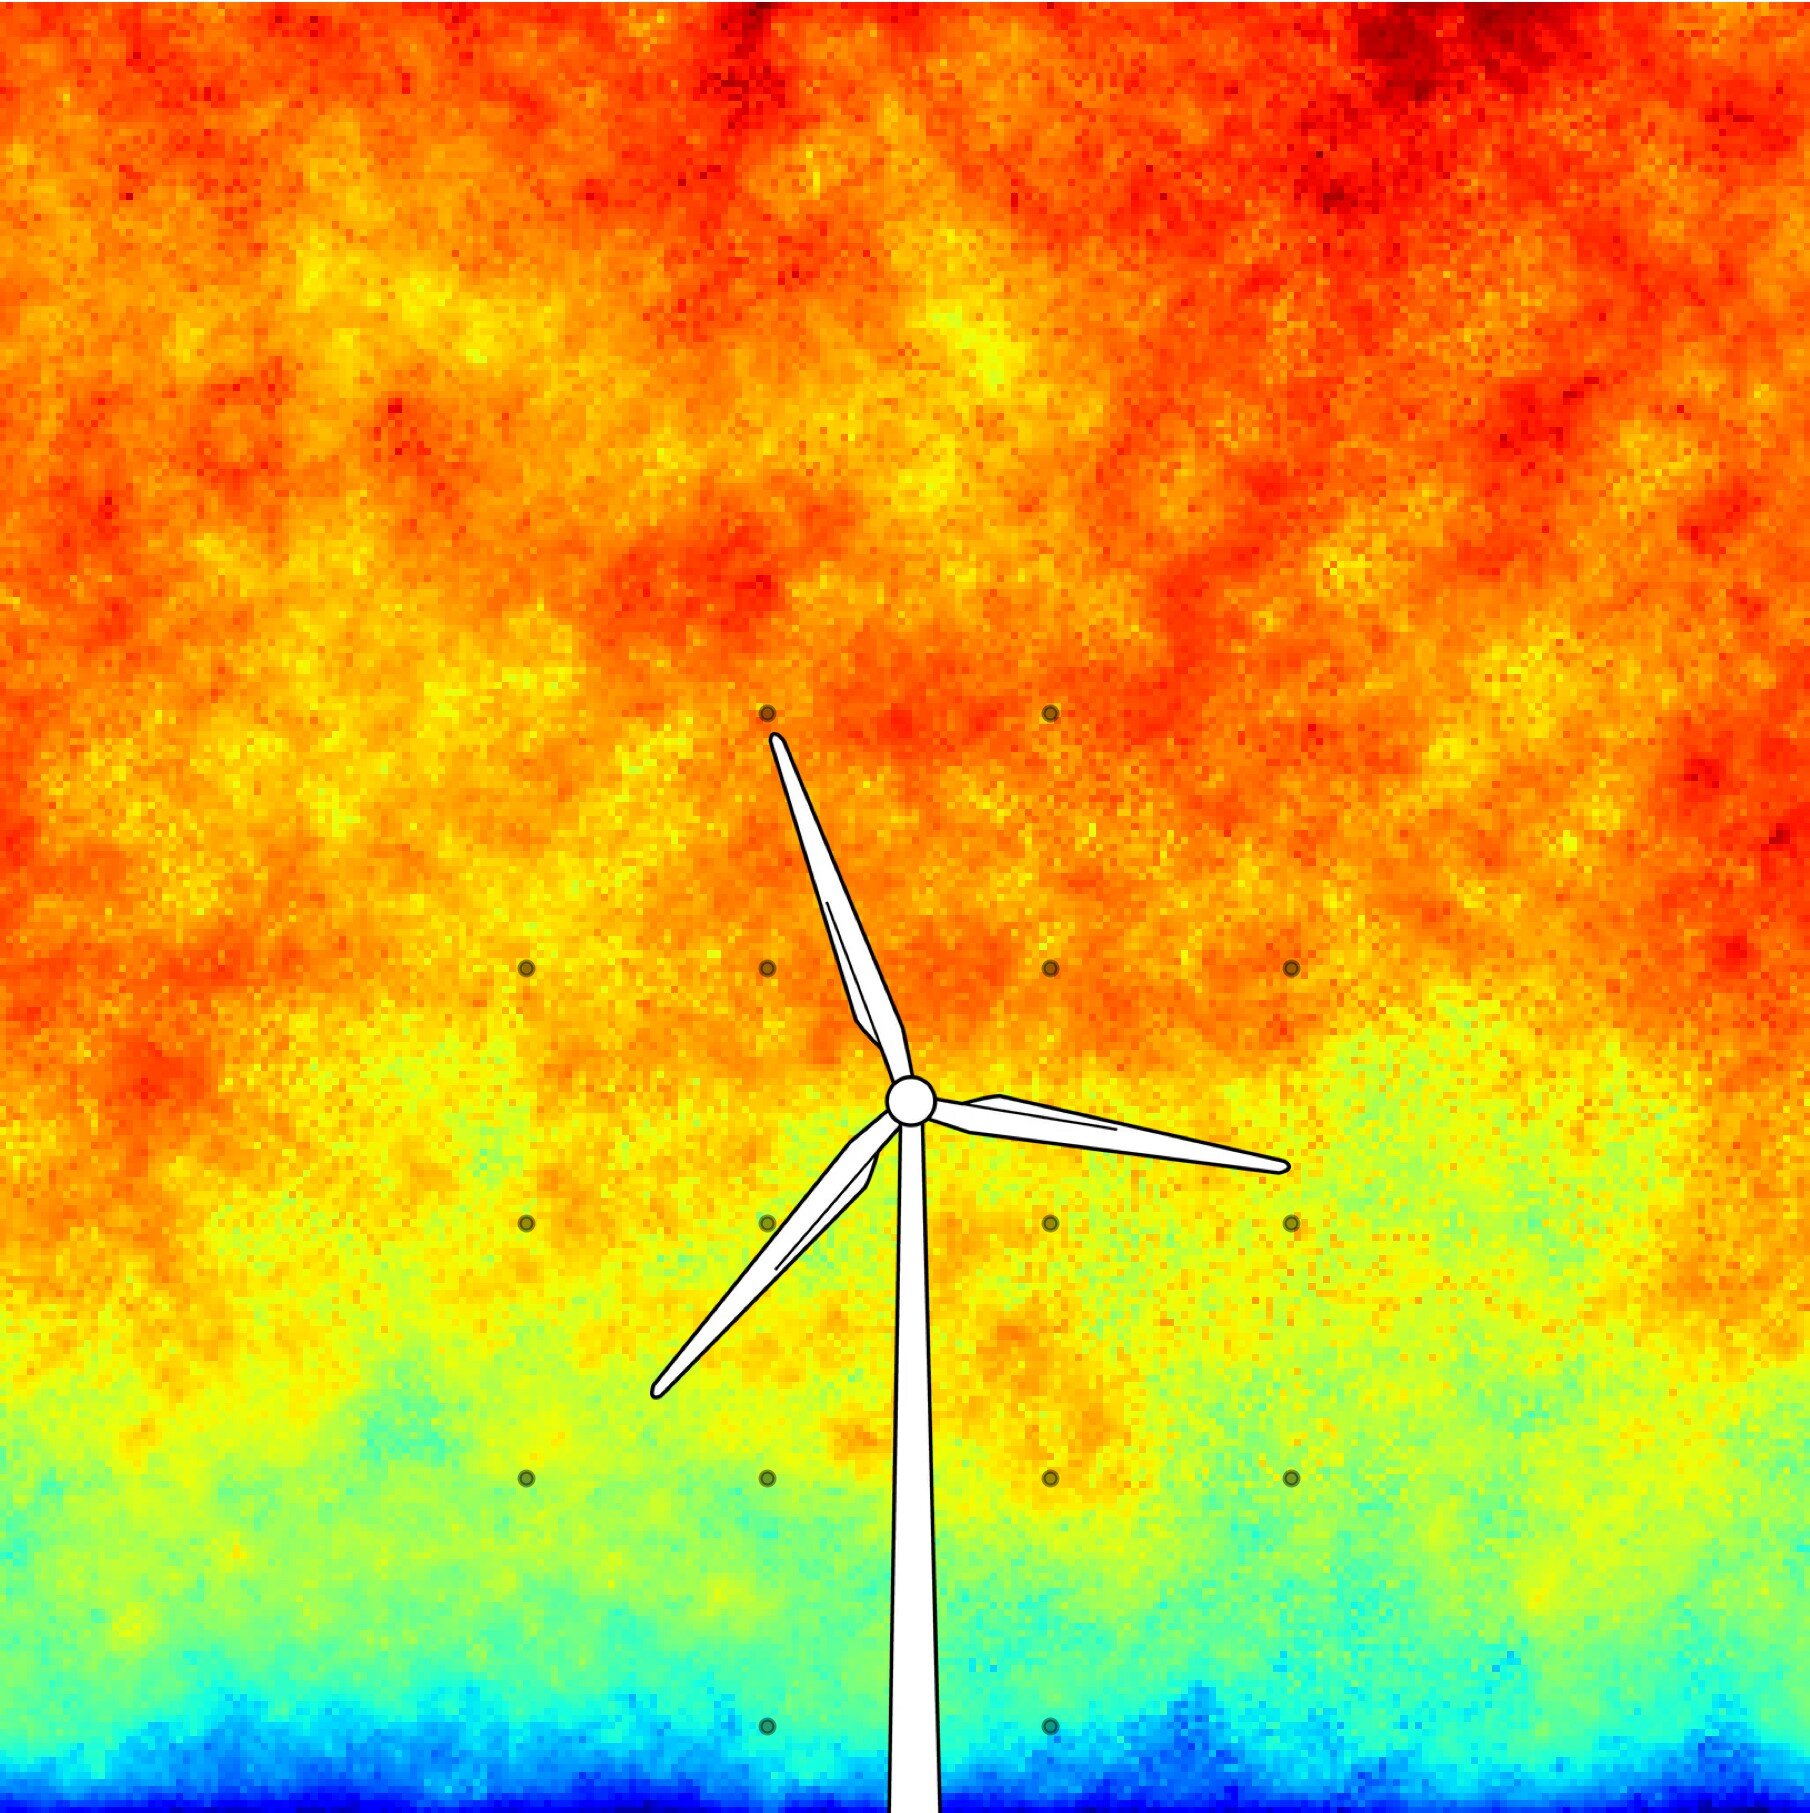 New wind field models accurately describe wind gusts